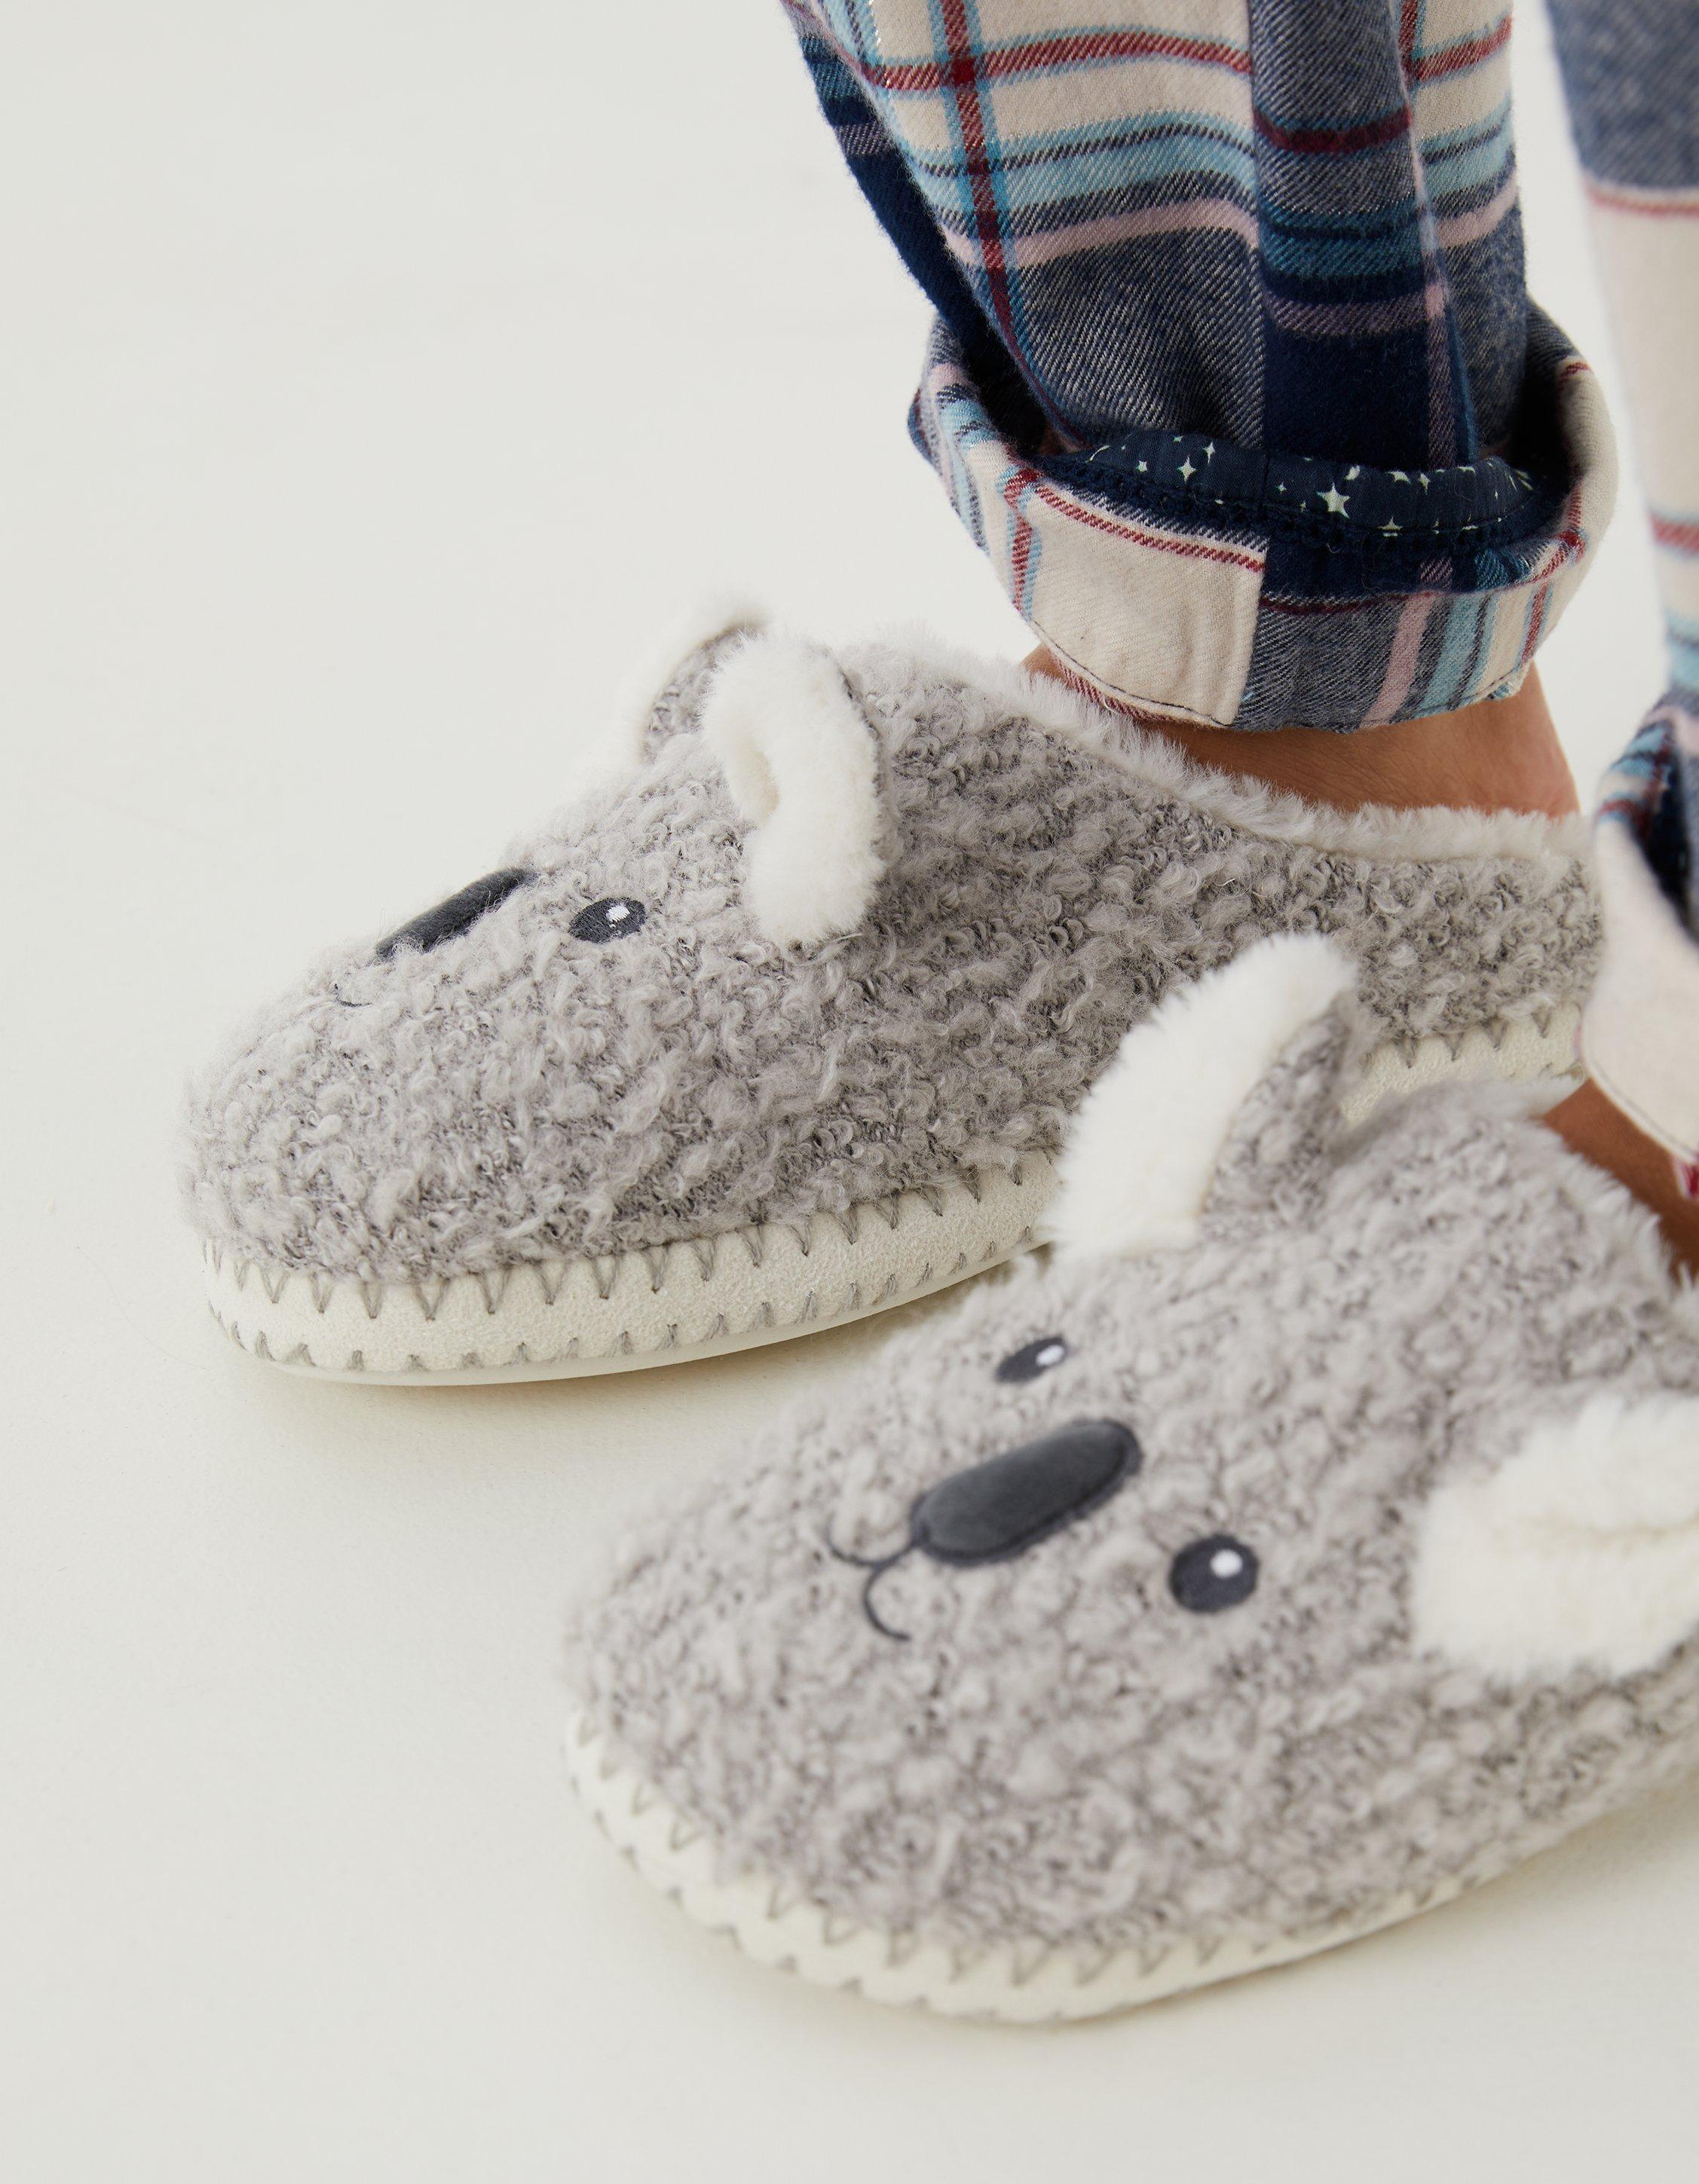 Cozy Like Kylie! 9 Fluffy Slippers to Keep Your Feet Warm During